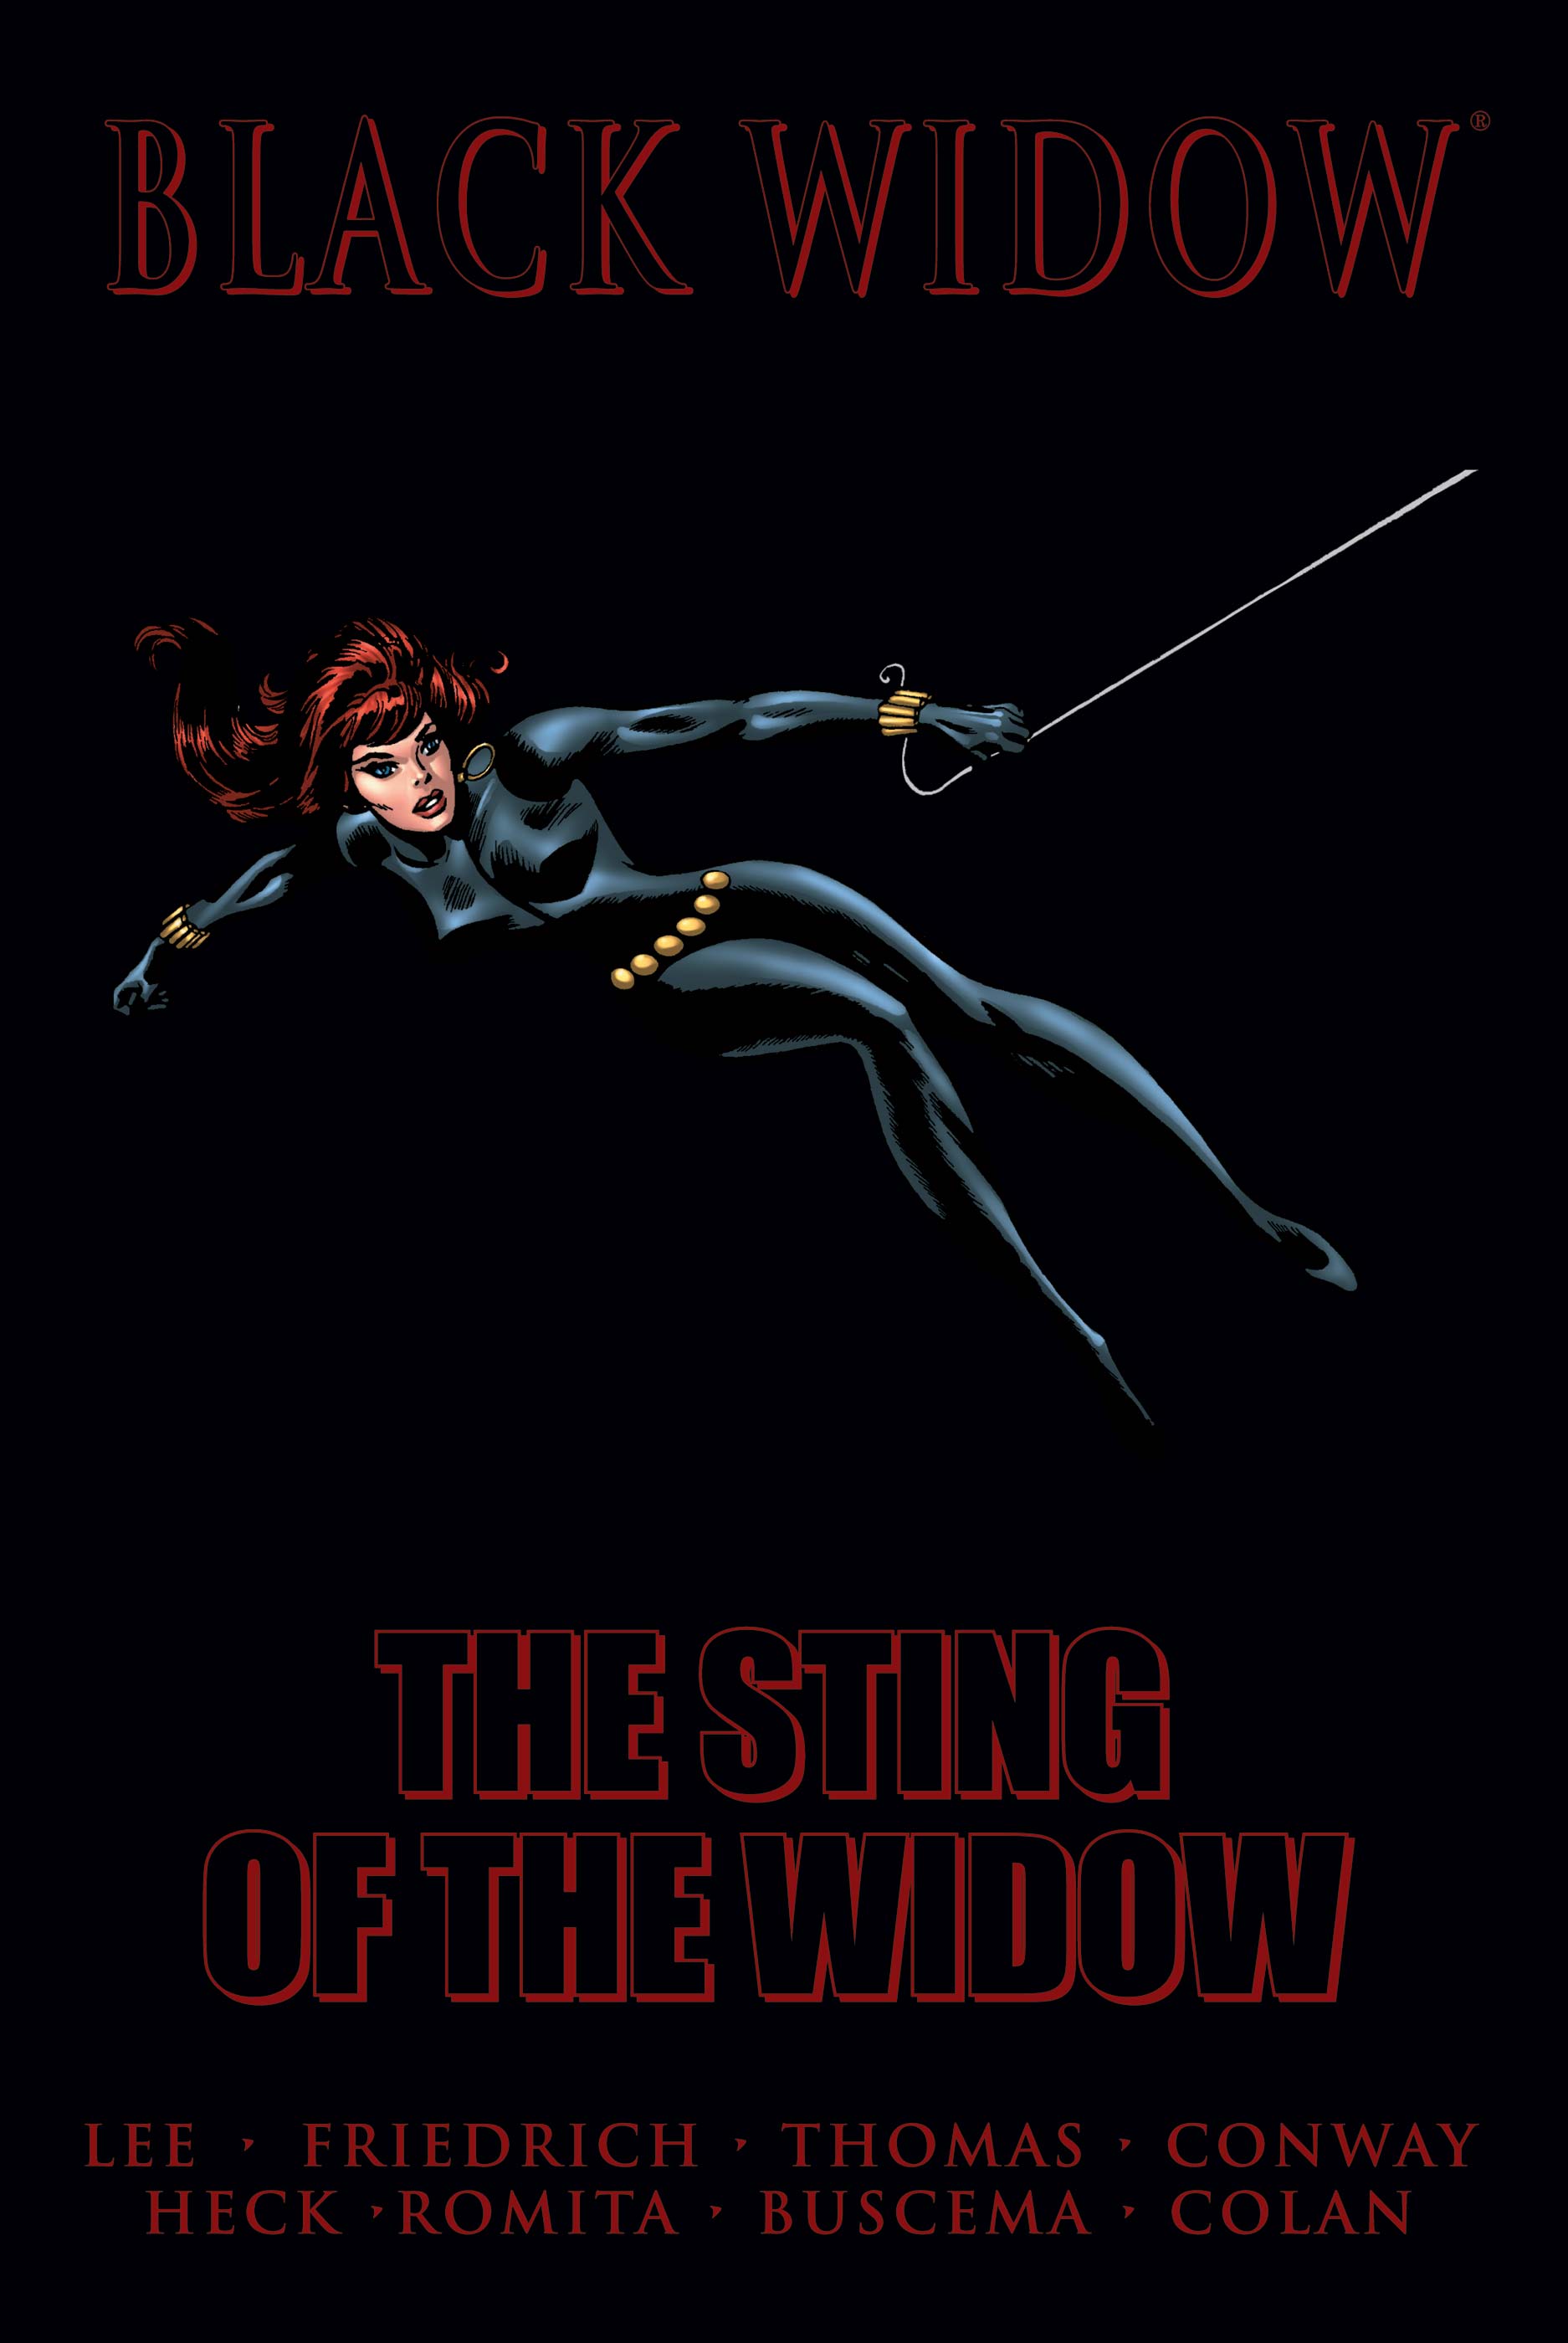 BLACK WIDOW: THE STING OF THE WIDOW PREMIERE HC (Trade Paperback)